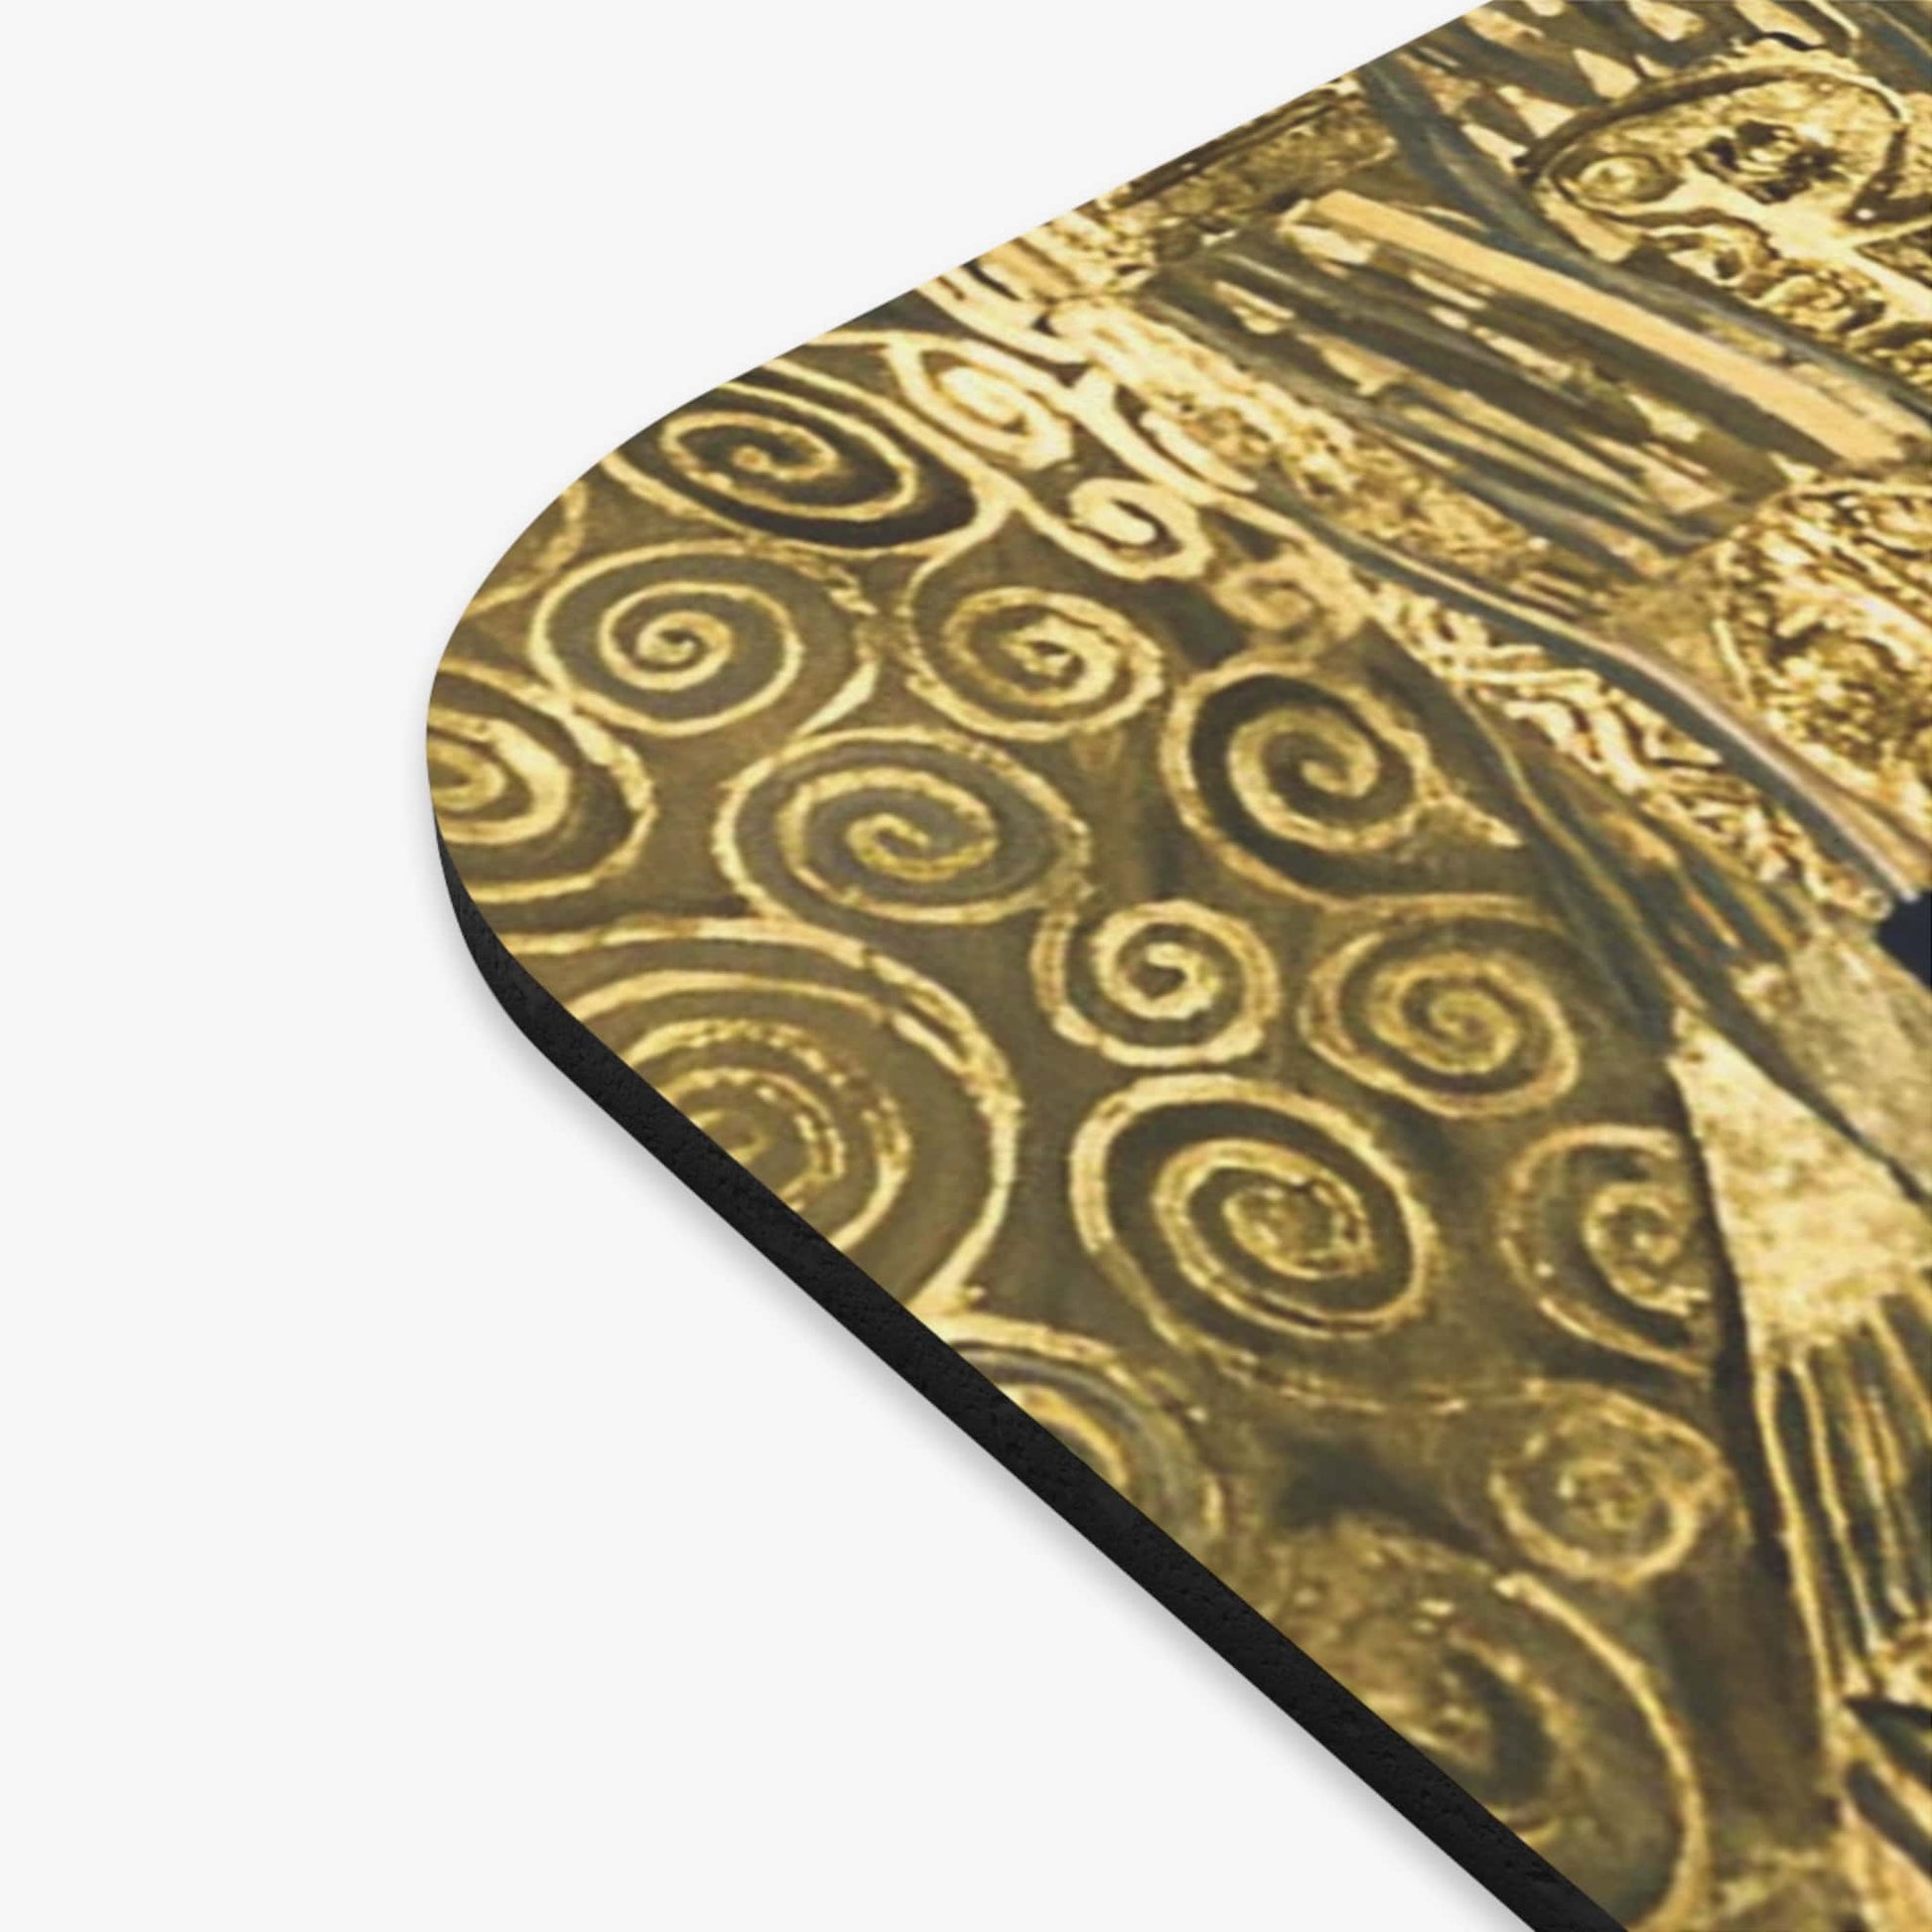 The Lady in Gold Vintage Mouse Pad Design Close Up